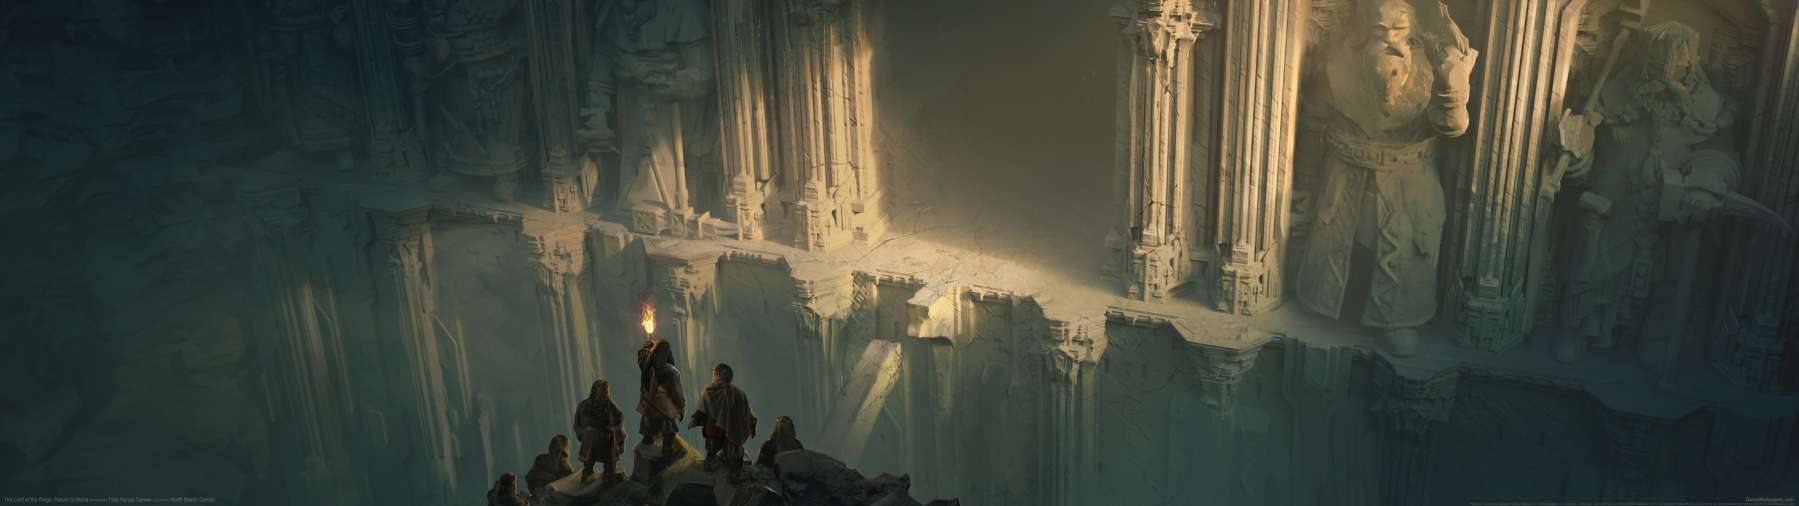 The Lord of the Rings: Return to Moria superwide wallpaper or background 04